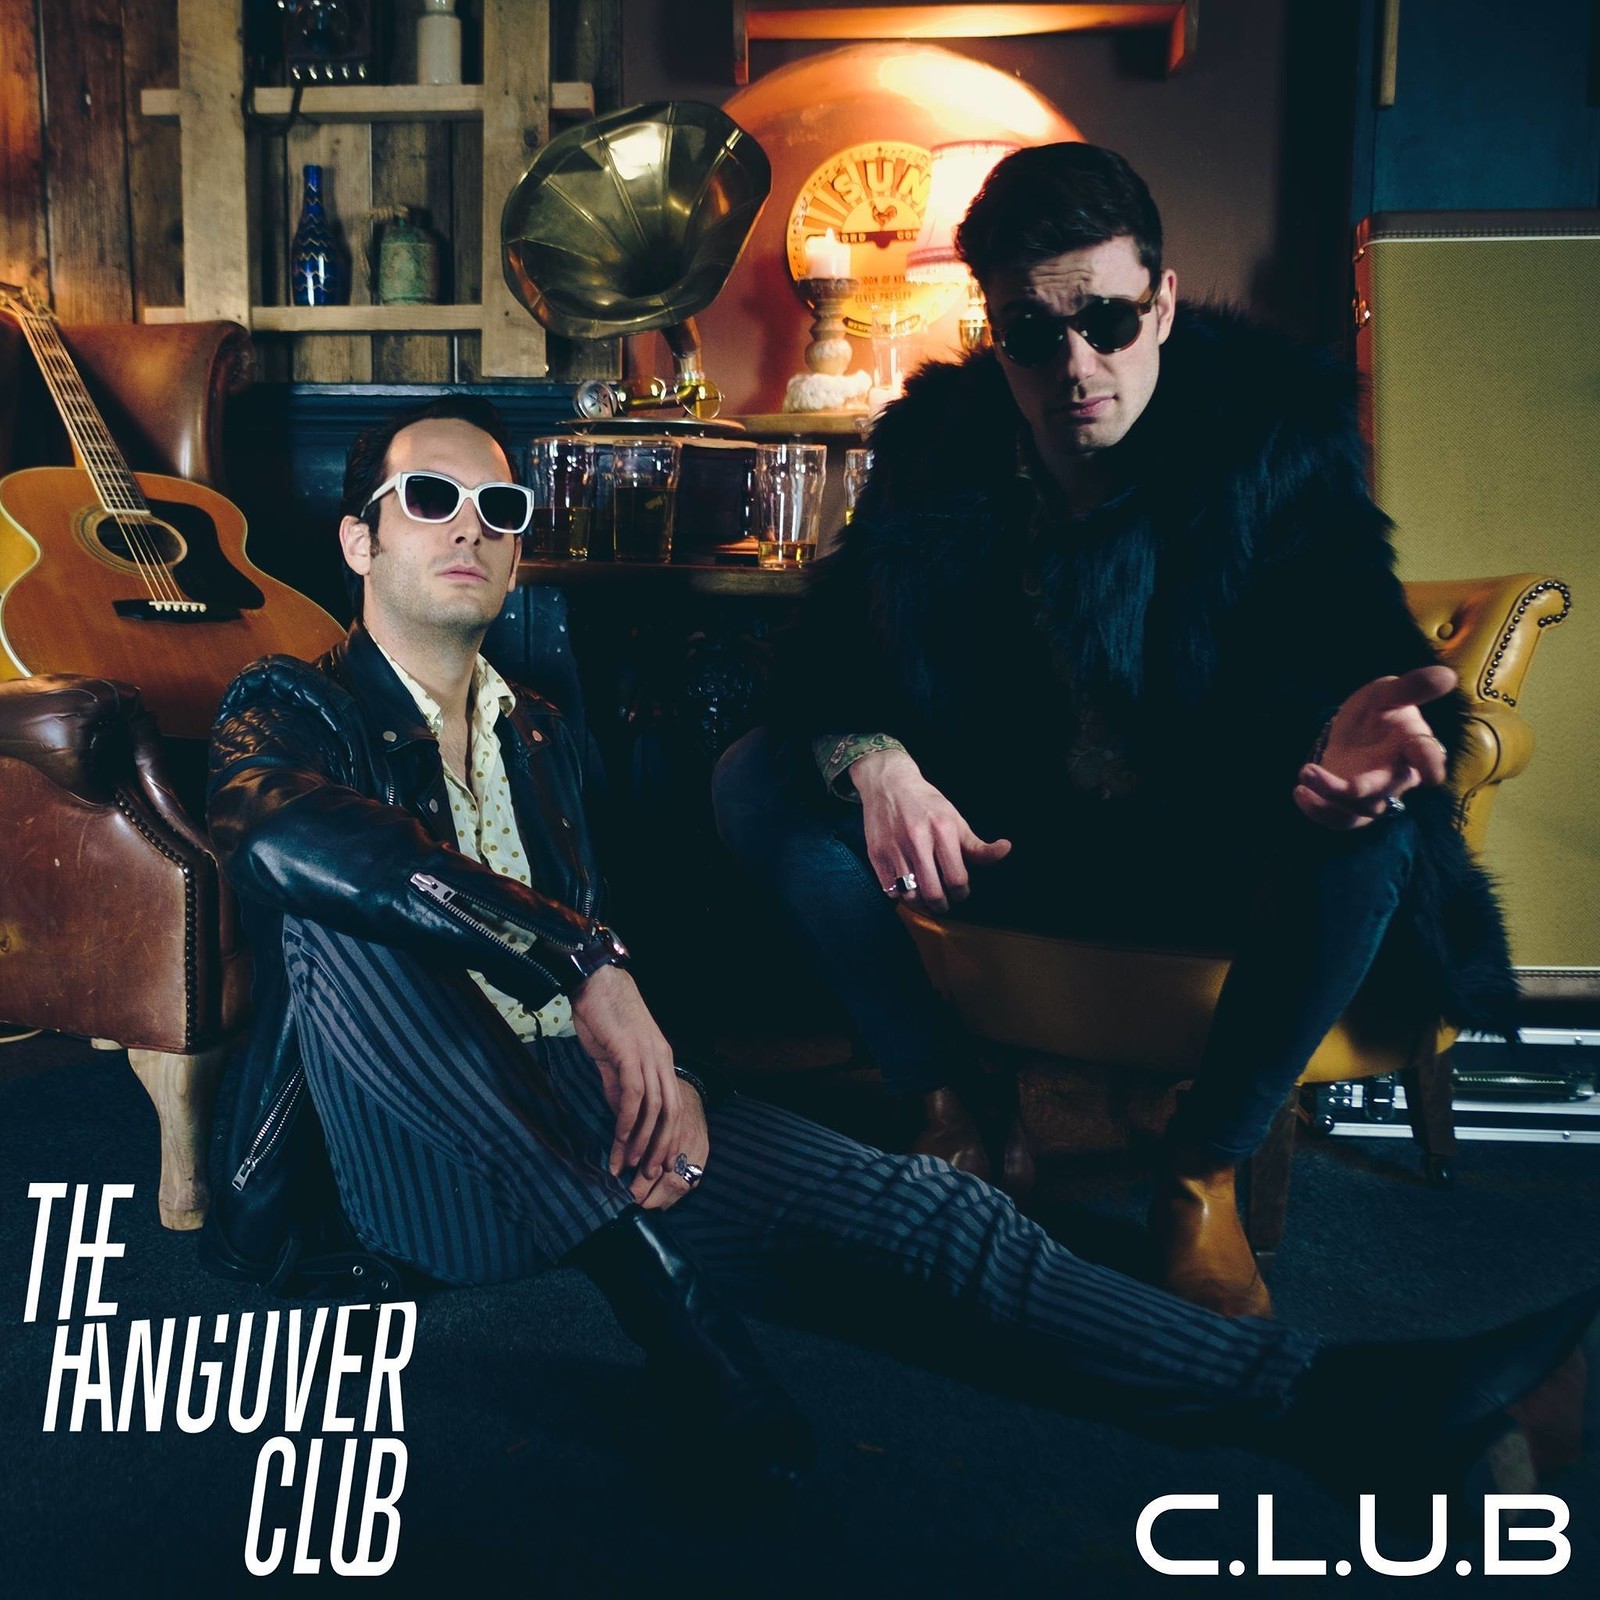 The Hangover Club at The Bristol Fringe